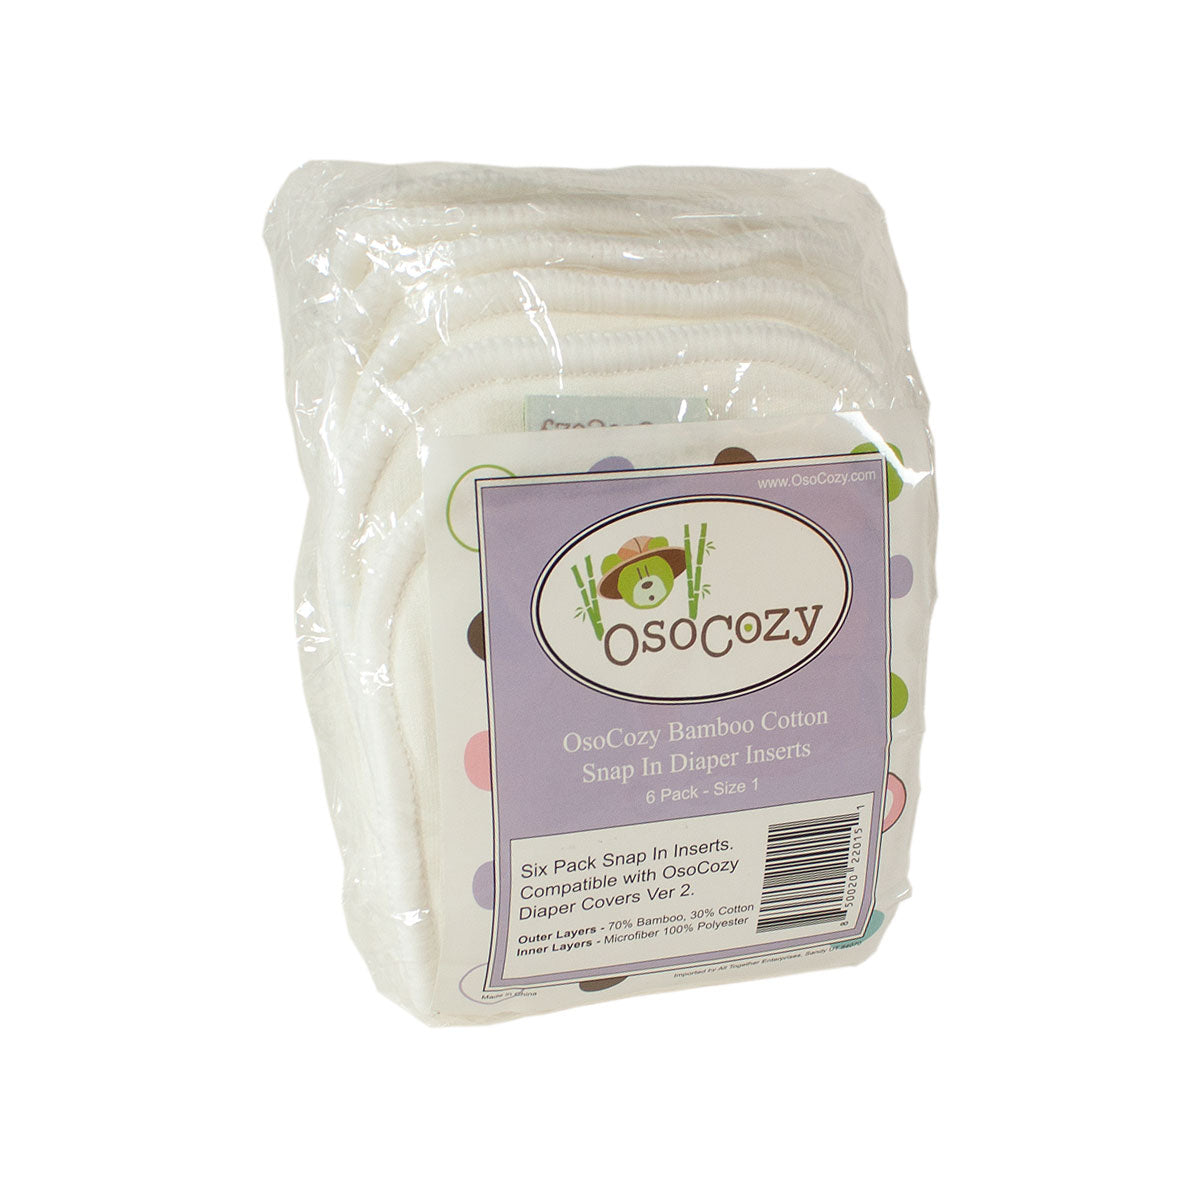 Osocozy Bamboo Cotton Snap In Diaper Inserts (6 pk)